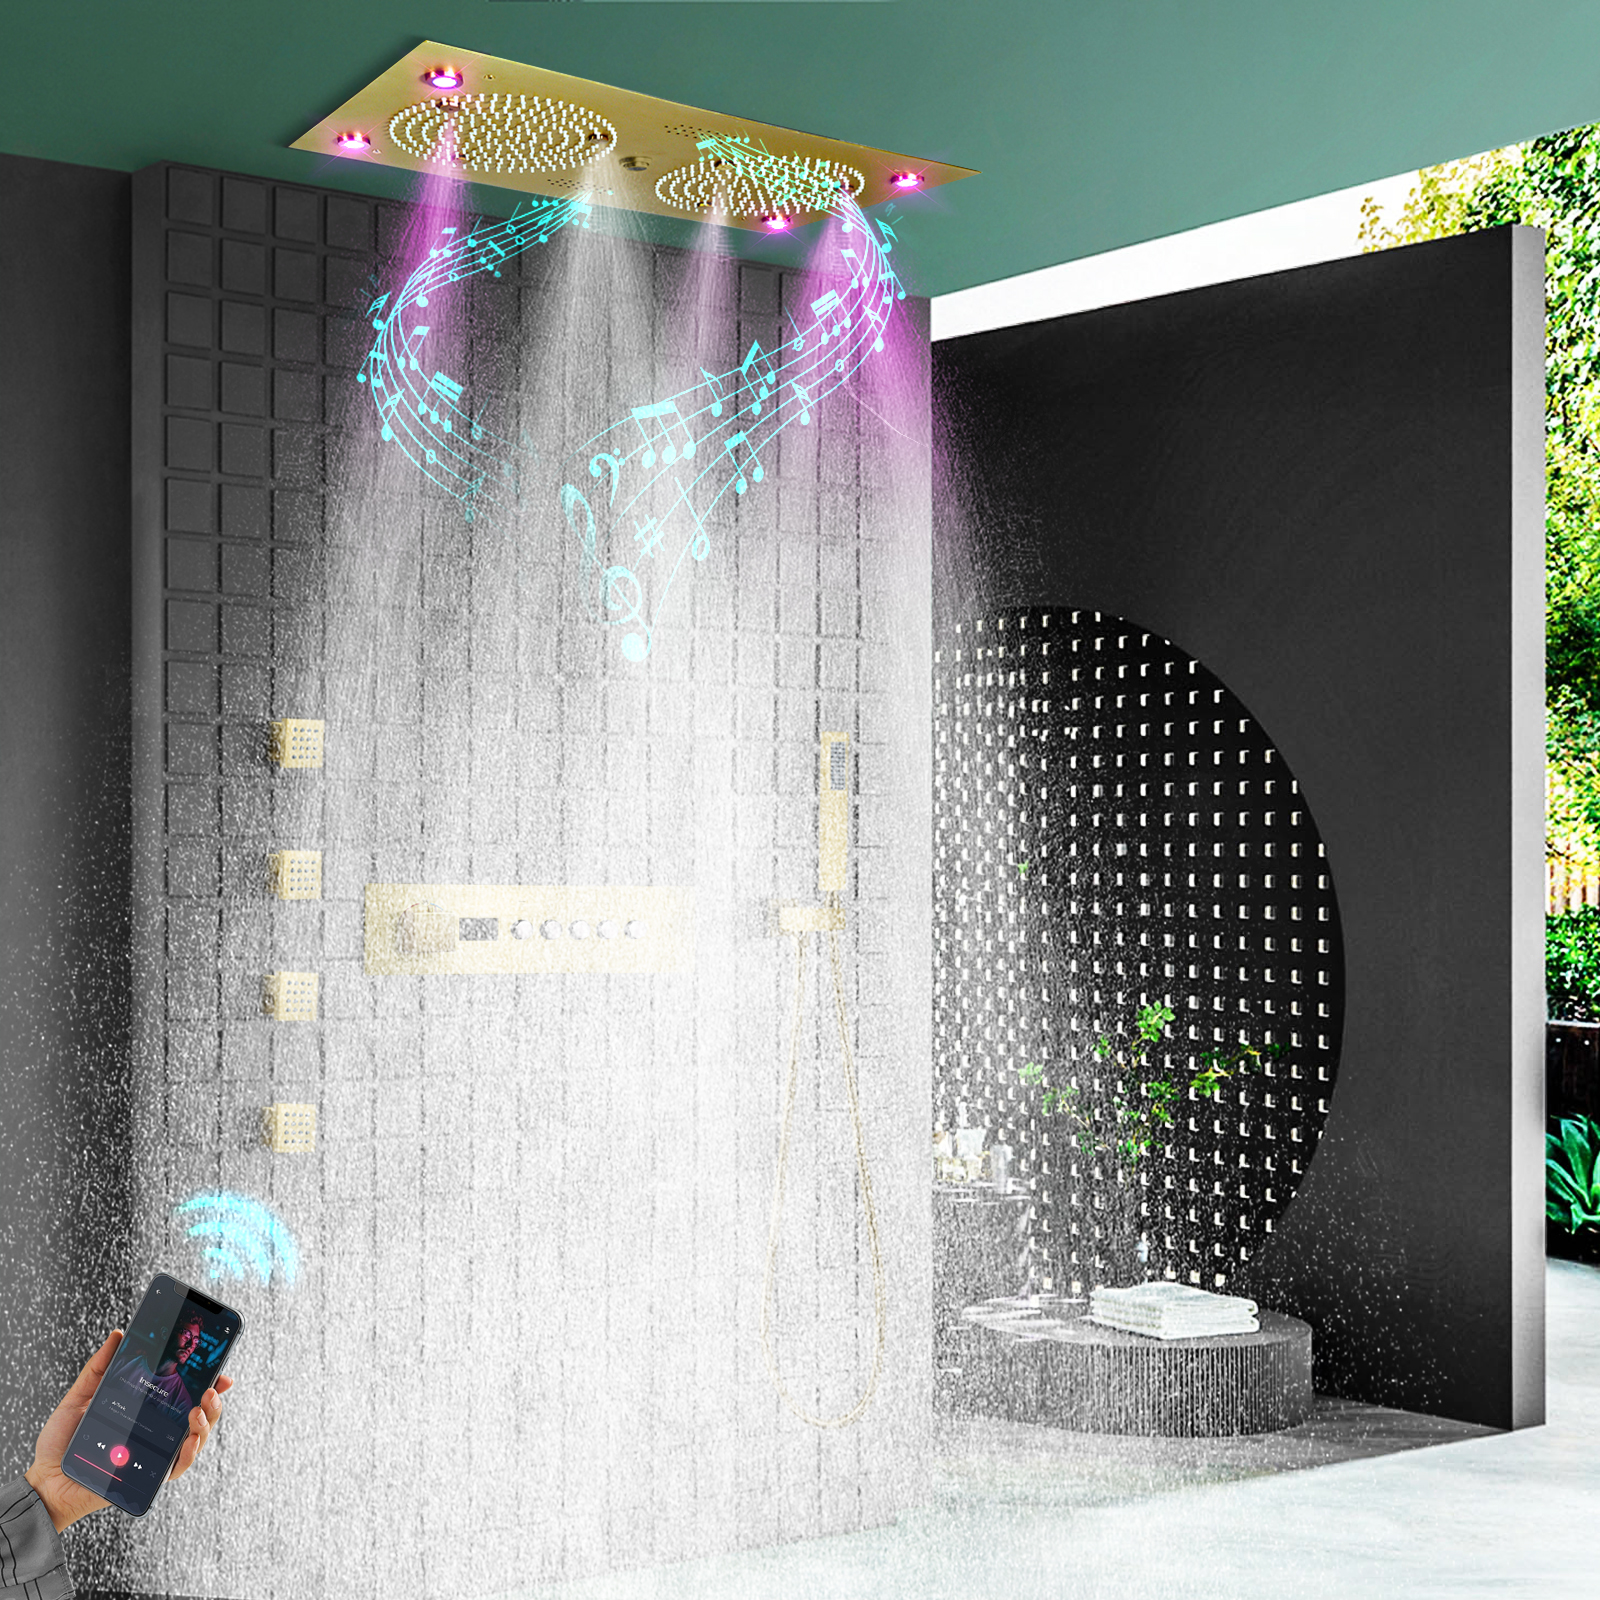 24.5x12.5 Inch Brushed Gold LED Music Shower System Set Bathroom Shower Height Temperature Water Dragon Massage Head Injection